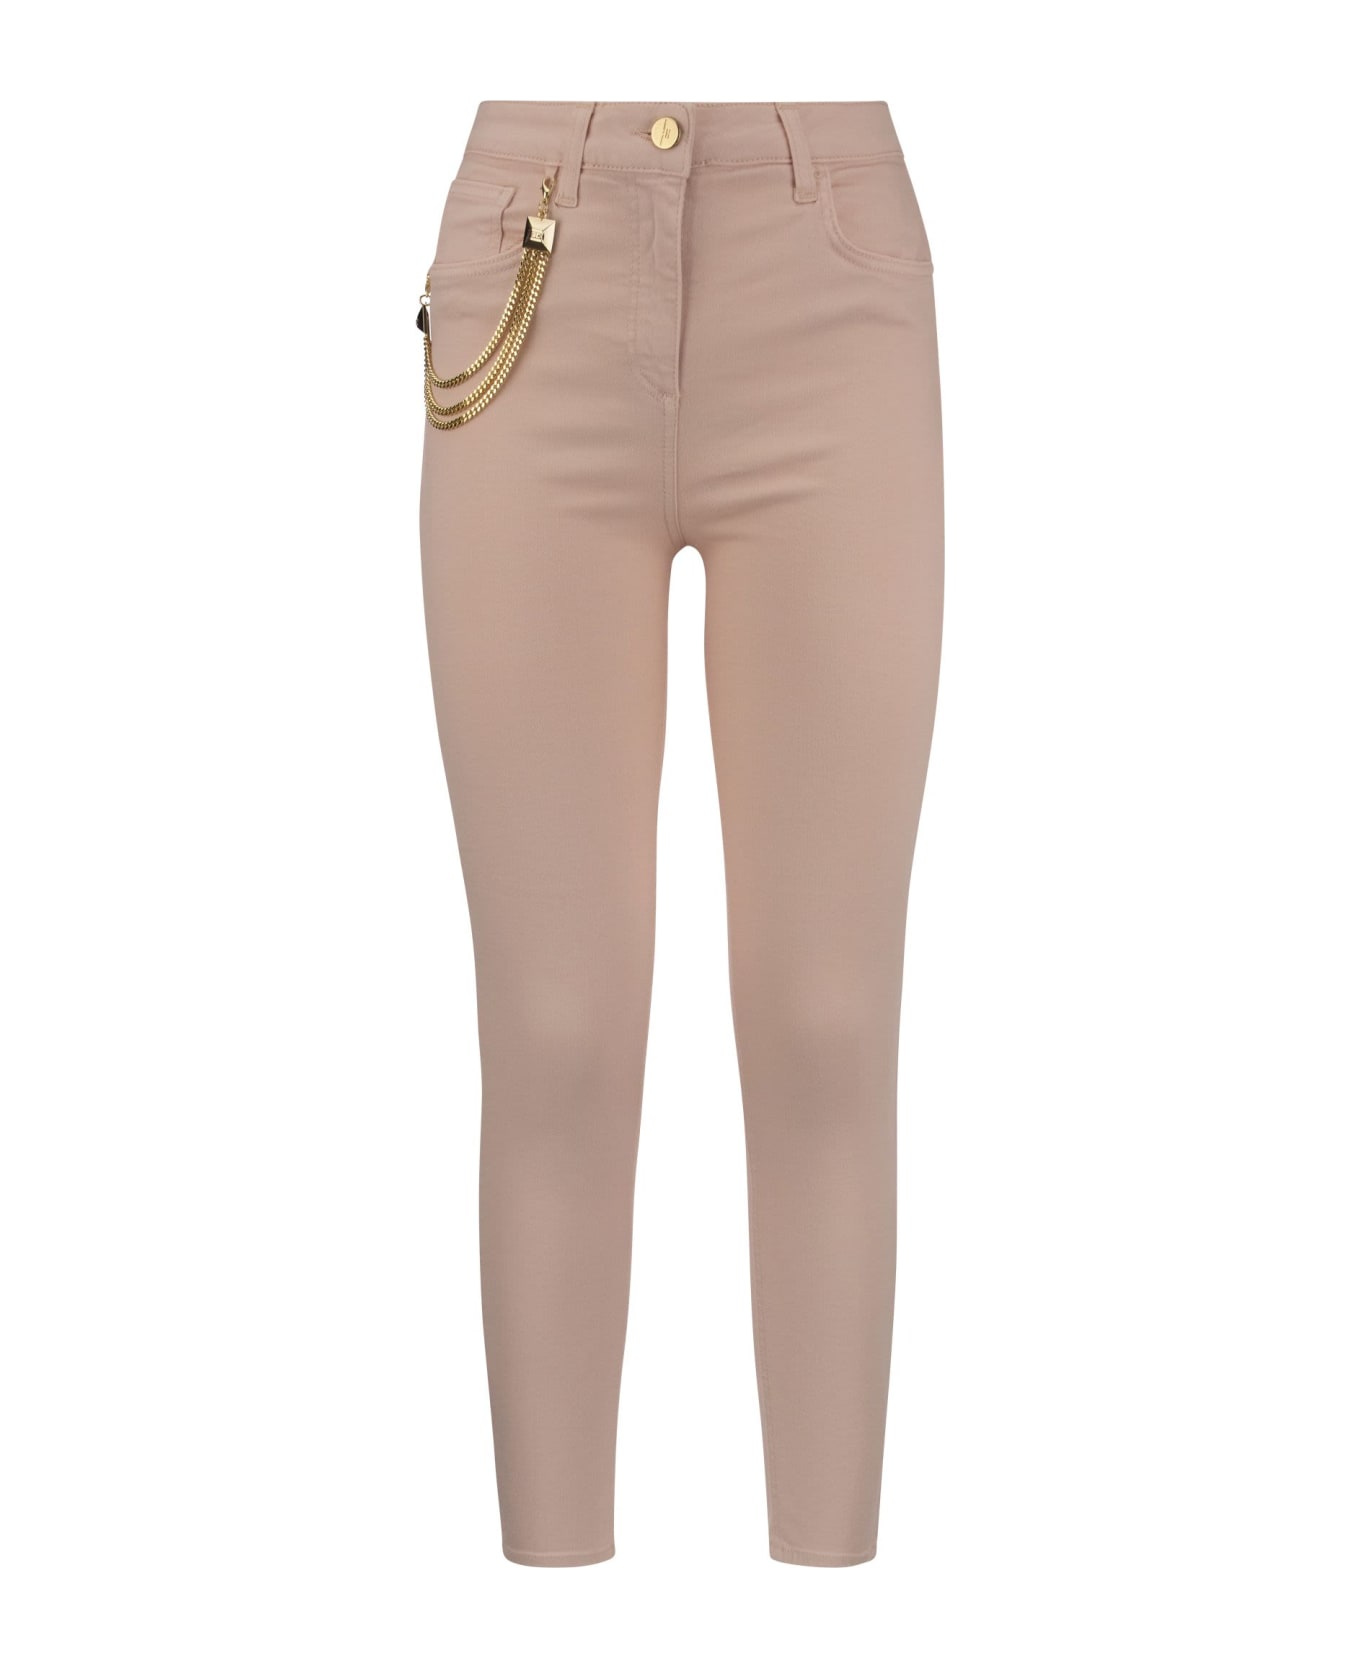 Elisabetta Franchi Skinny Jeans With Chain And Stud Charm - Pink Baby